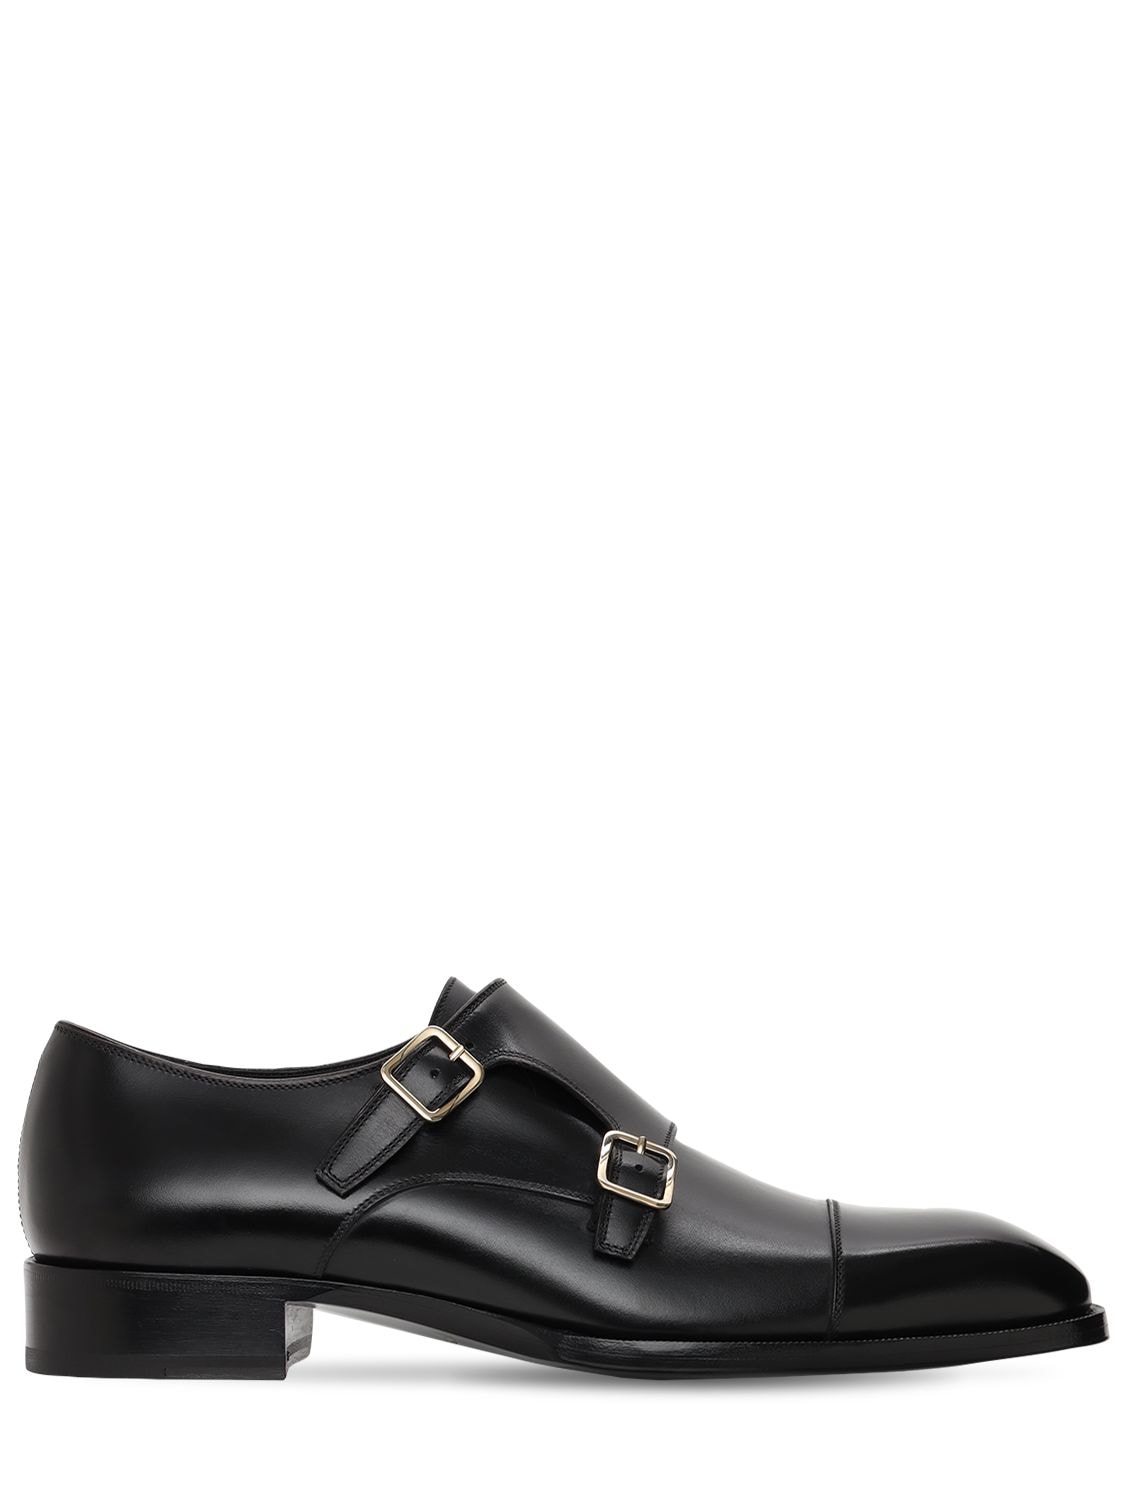 TOM FORD 30MM MONK STRAP LEATHER SHOES,73IY1E004-TKVS0